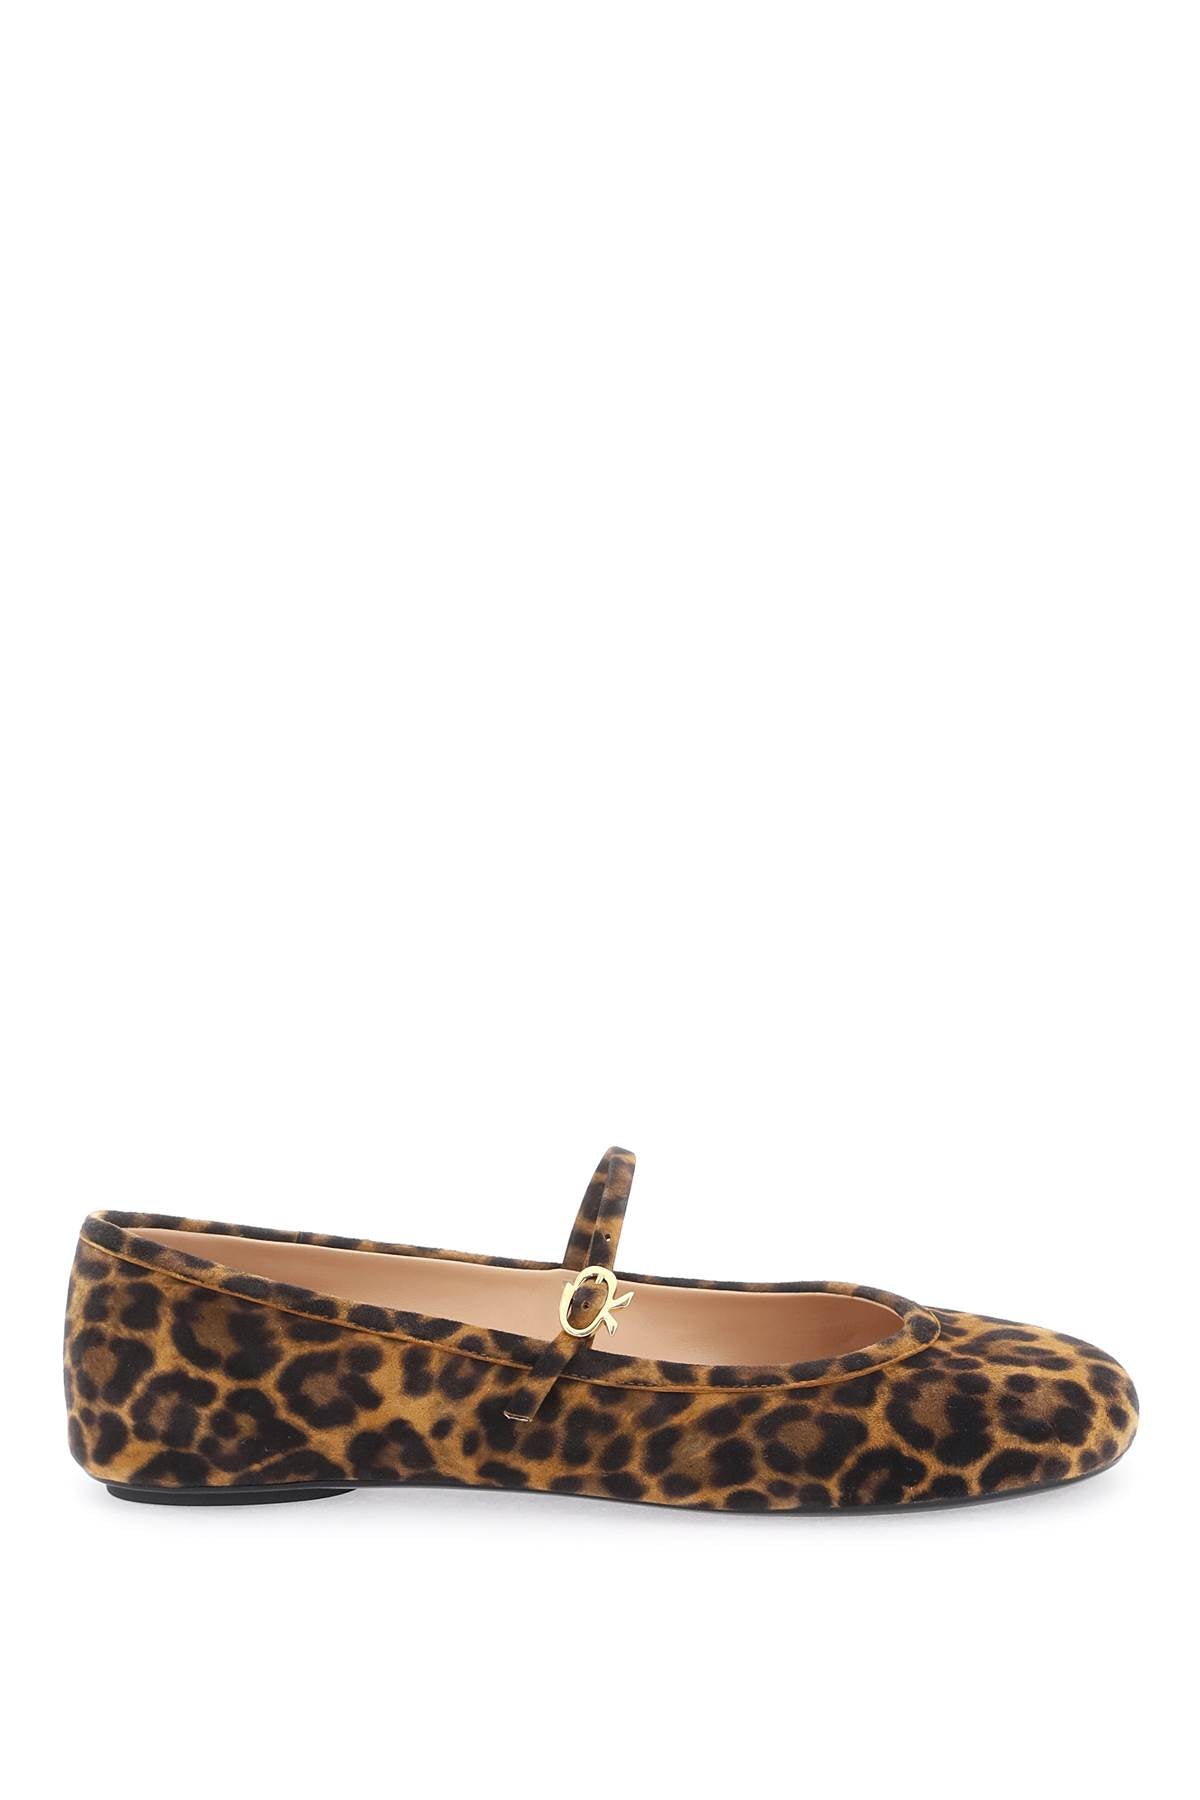 GIANVITO ROSSI The Carla's Ballet: Brown Animal Print Ballerinas with Adjustable Strap and Iconic Gold Buckle